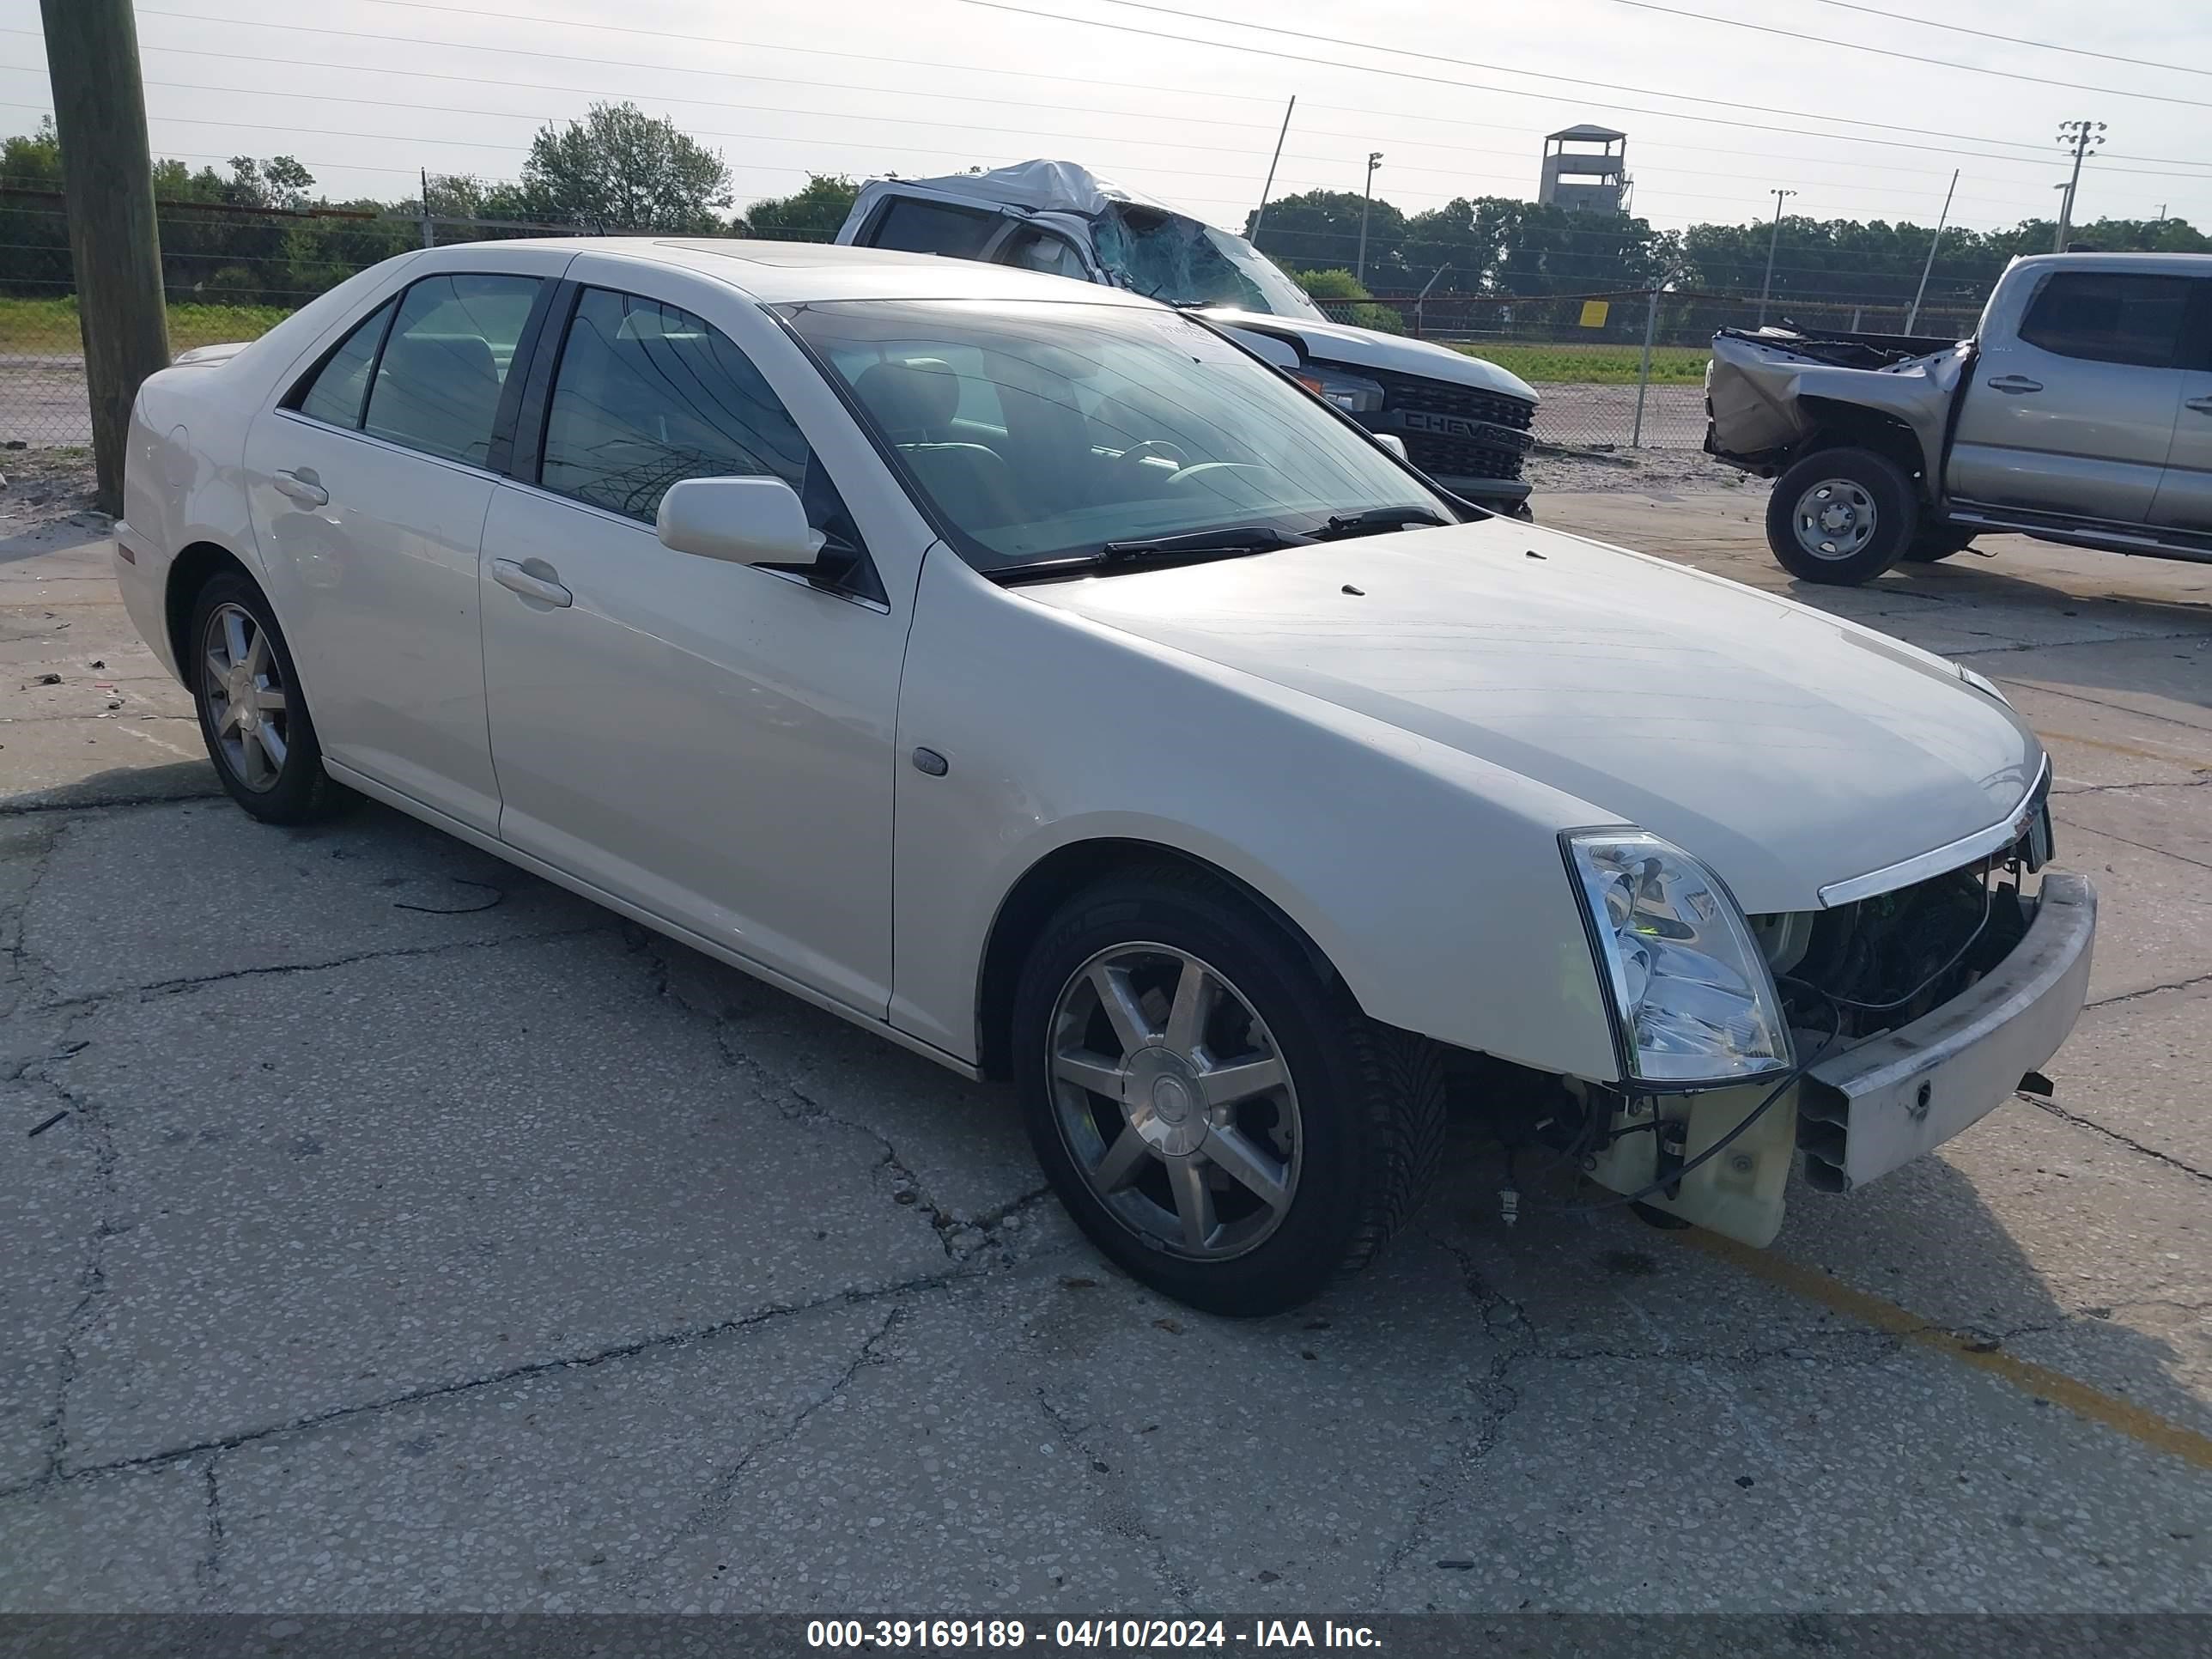 VIN: 1G6DC67A150150431 - cadillac sts